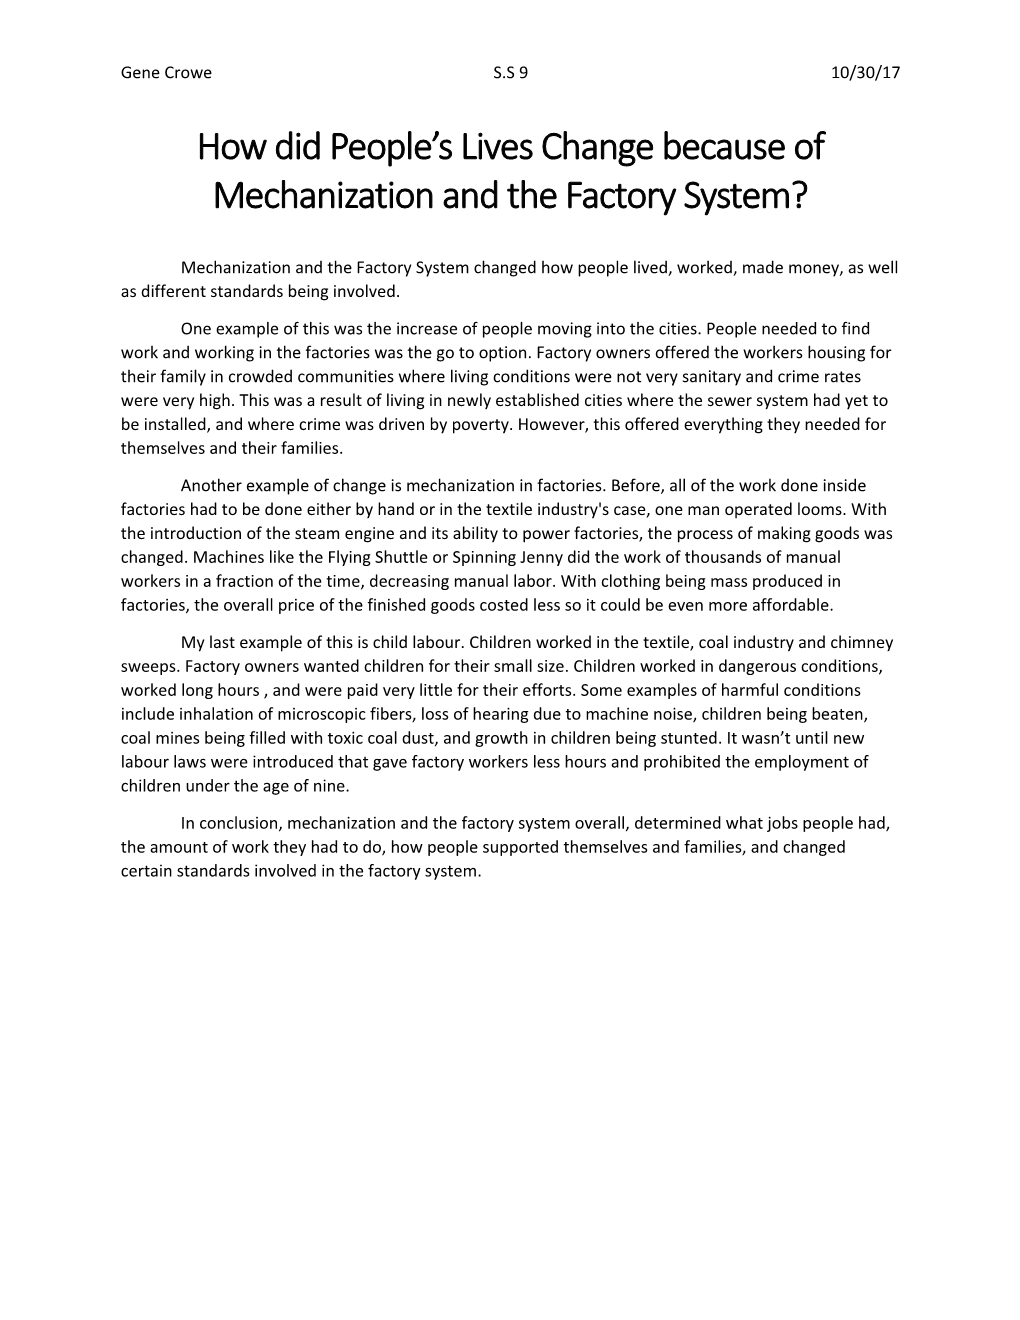 How Did People S Lives Change Because of Mechanization and the Factory System?